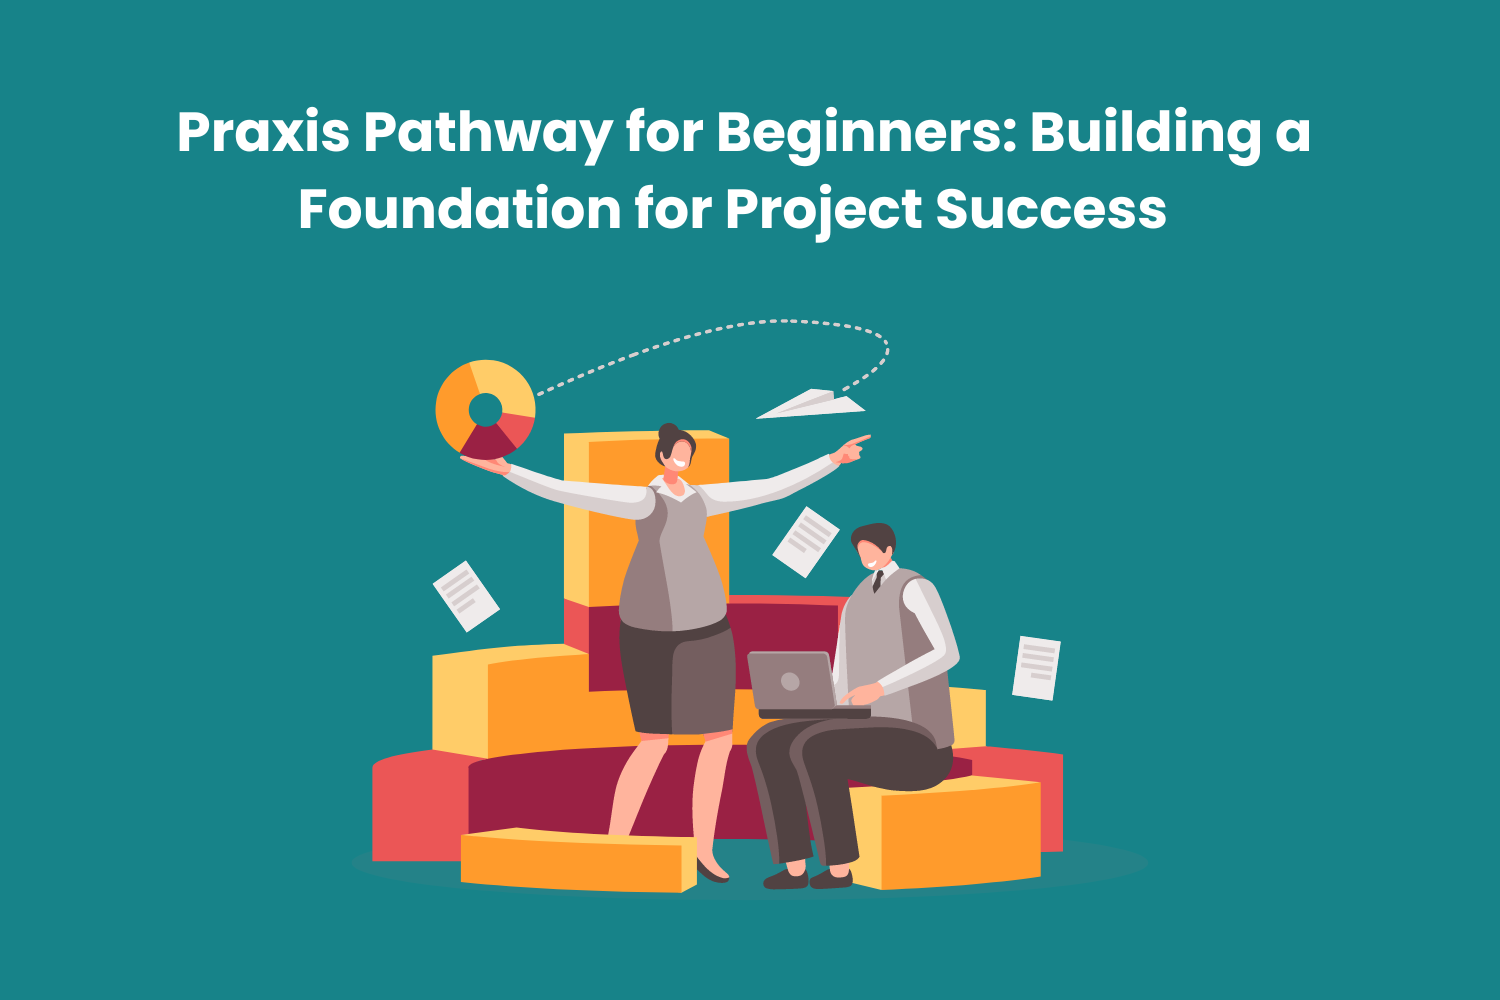 Praxis Pathway for Beginners: Building a Foundation for Project Success  